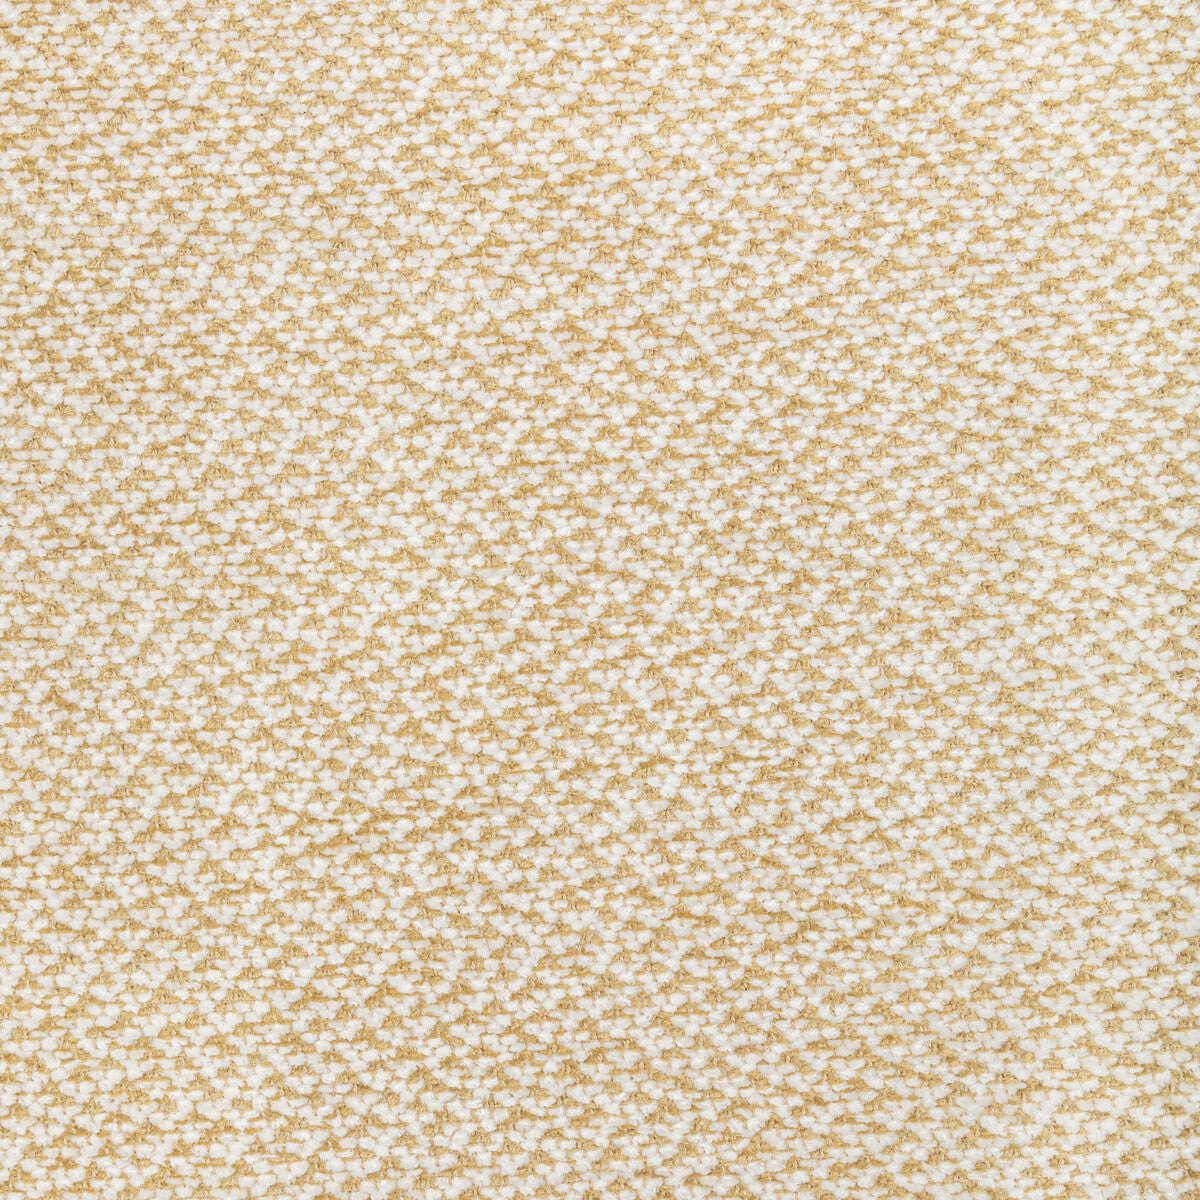 Sasson Texture fabric in gold color - pattern 8022122.4.0 - by Brunschwig &amp; Fils in the Chambery Textures III collection